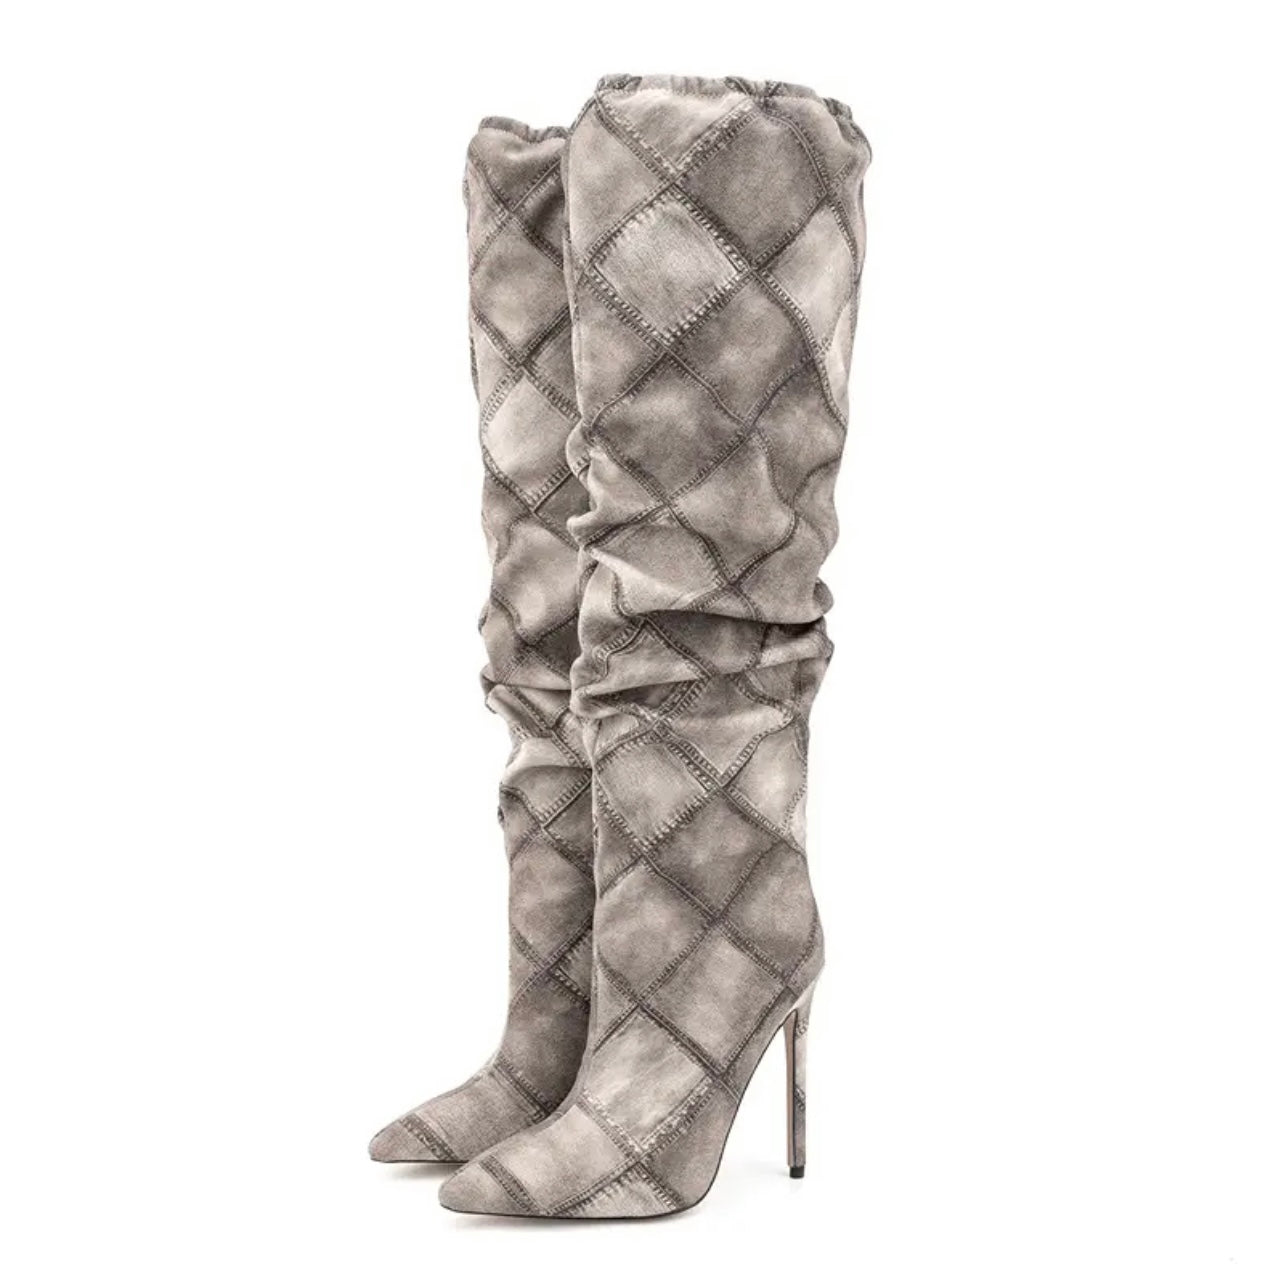 Staying Fabulous Knee High Boots Comes In Other Gorgeous Colors